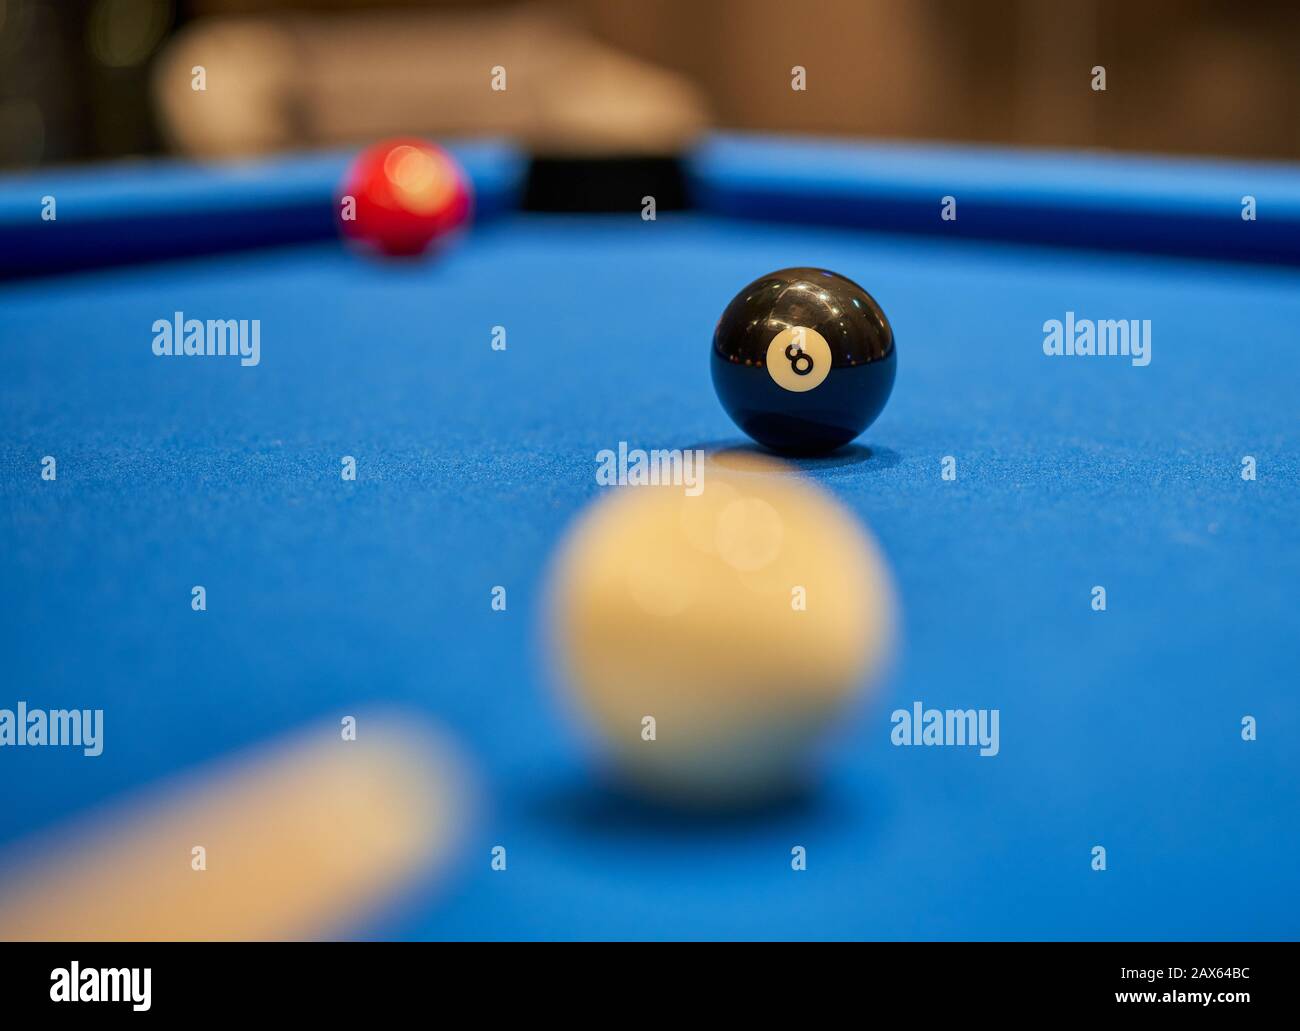 Pool/Billiard/Snooker focusing on the eight-ball. Chance to win the game. Stock Photo